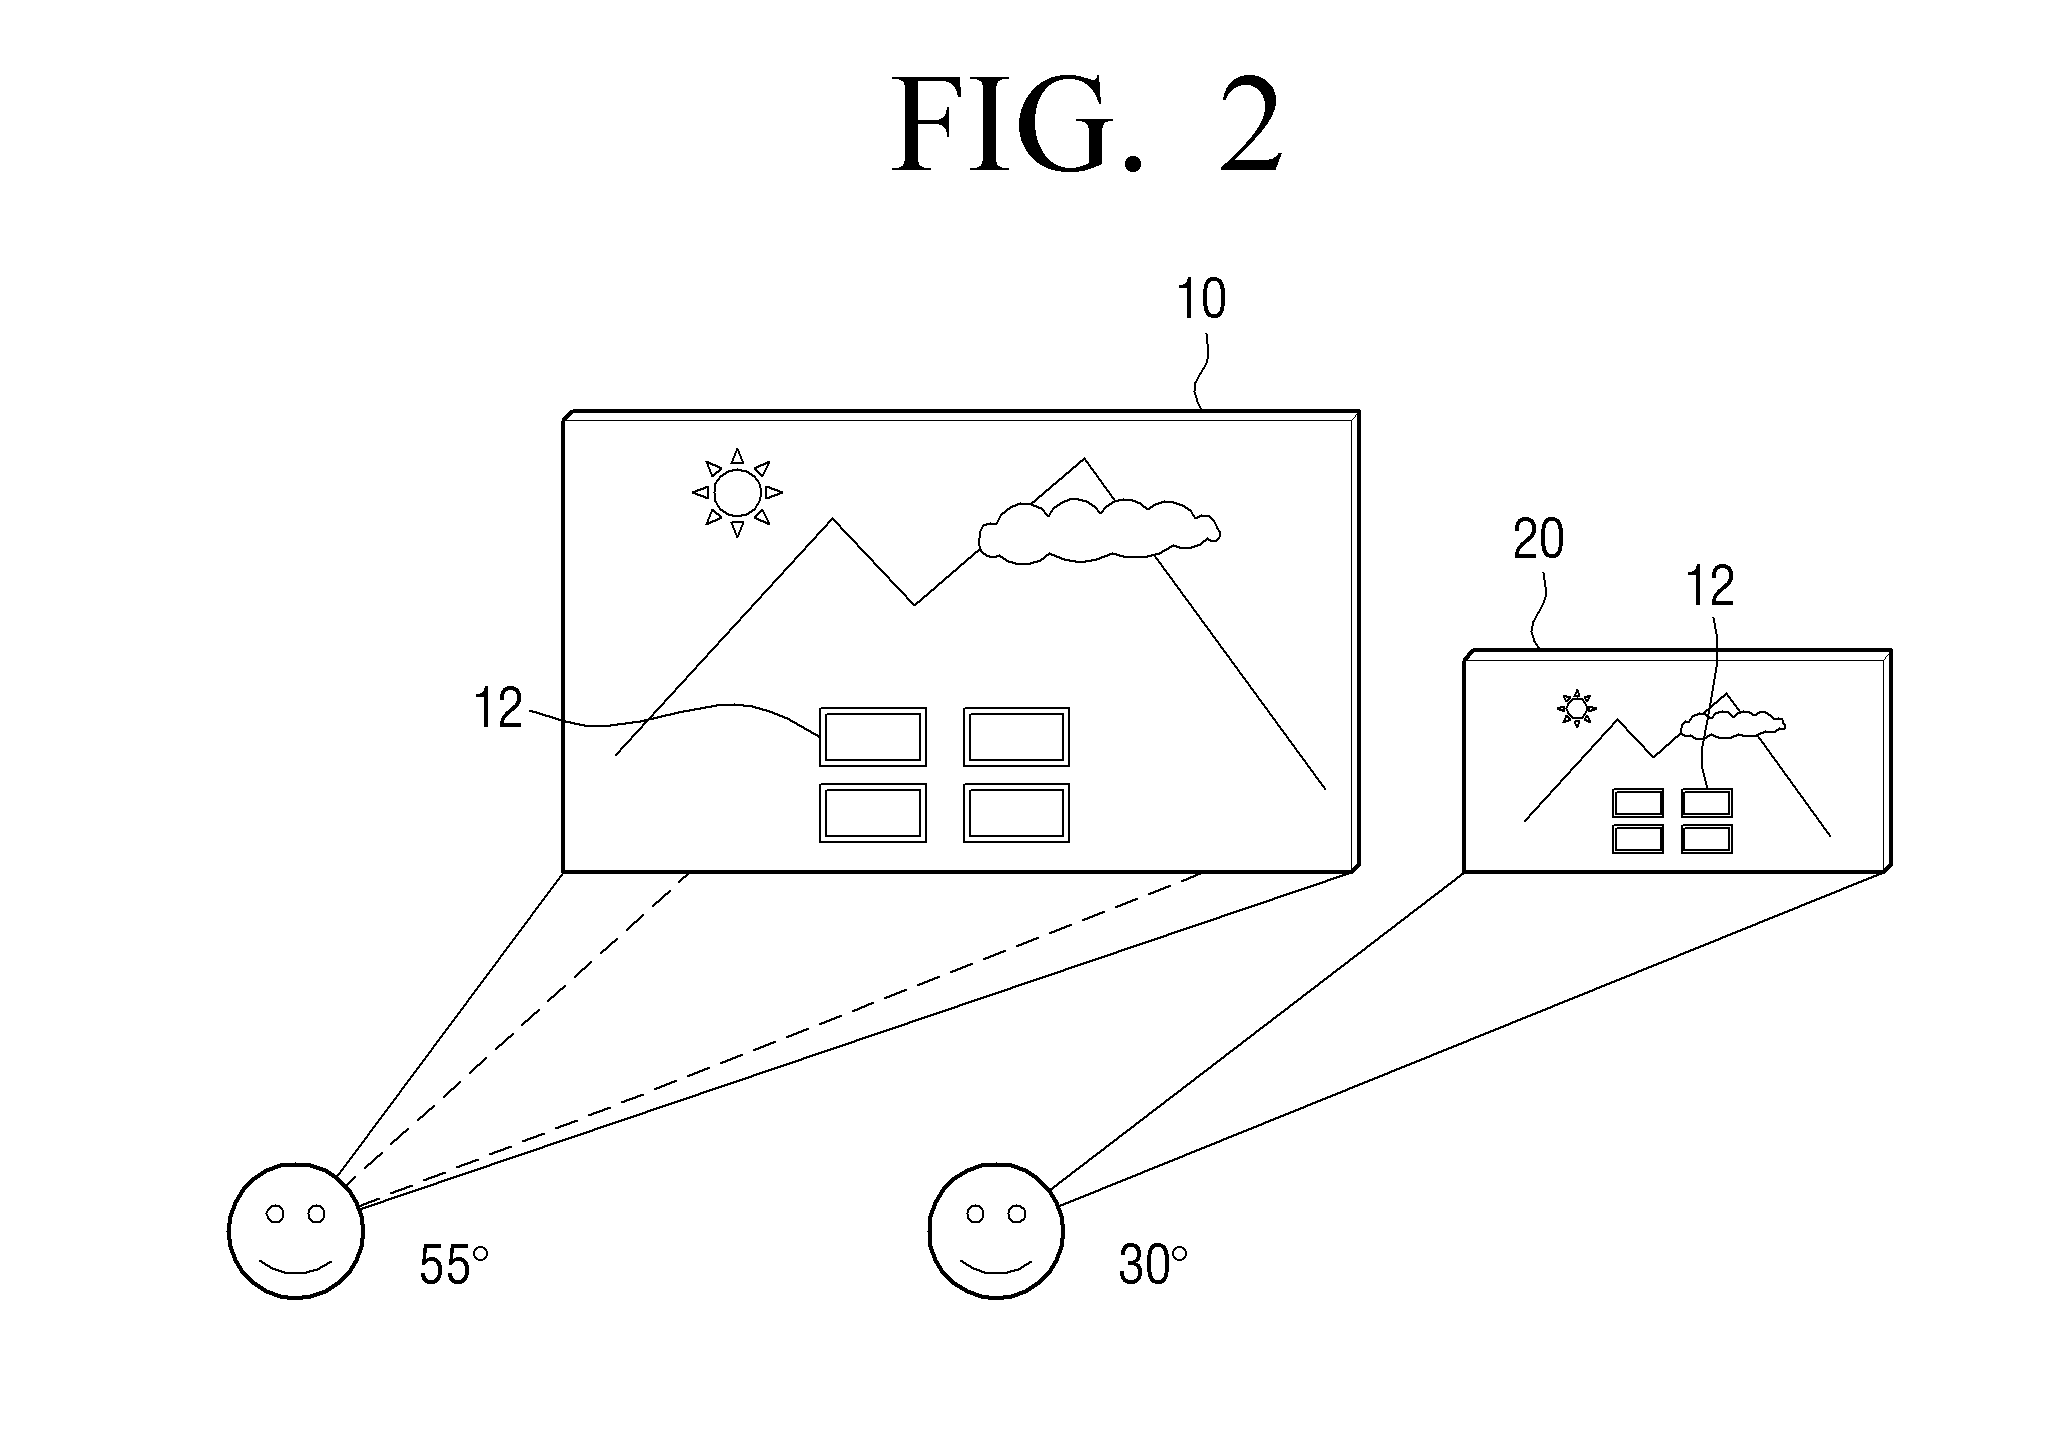 Content processing apparatus for processing high resolution content and method thereof